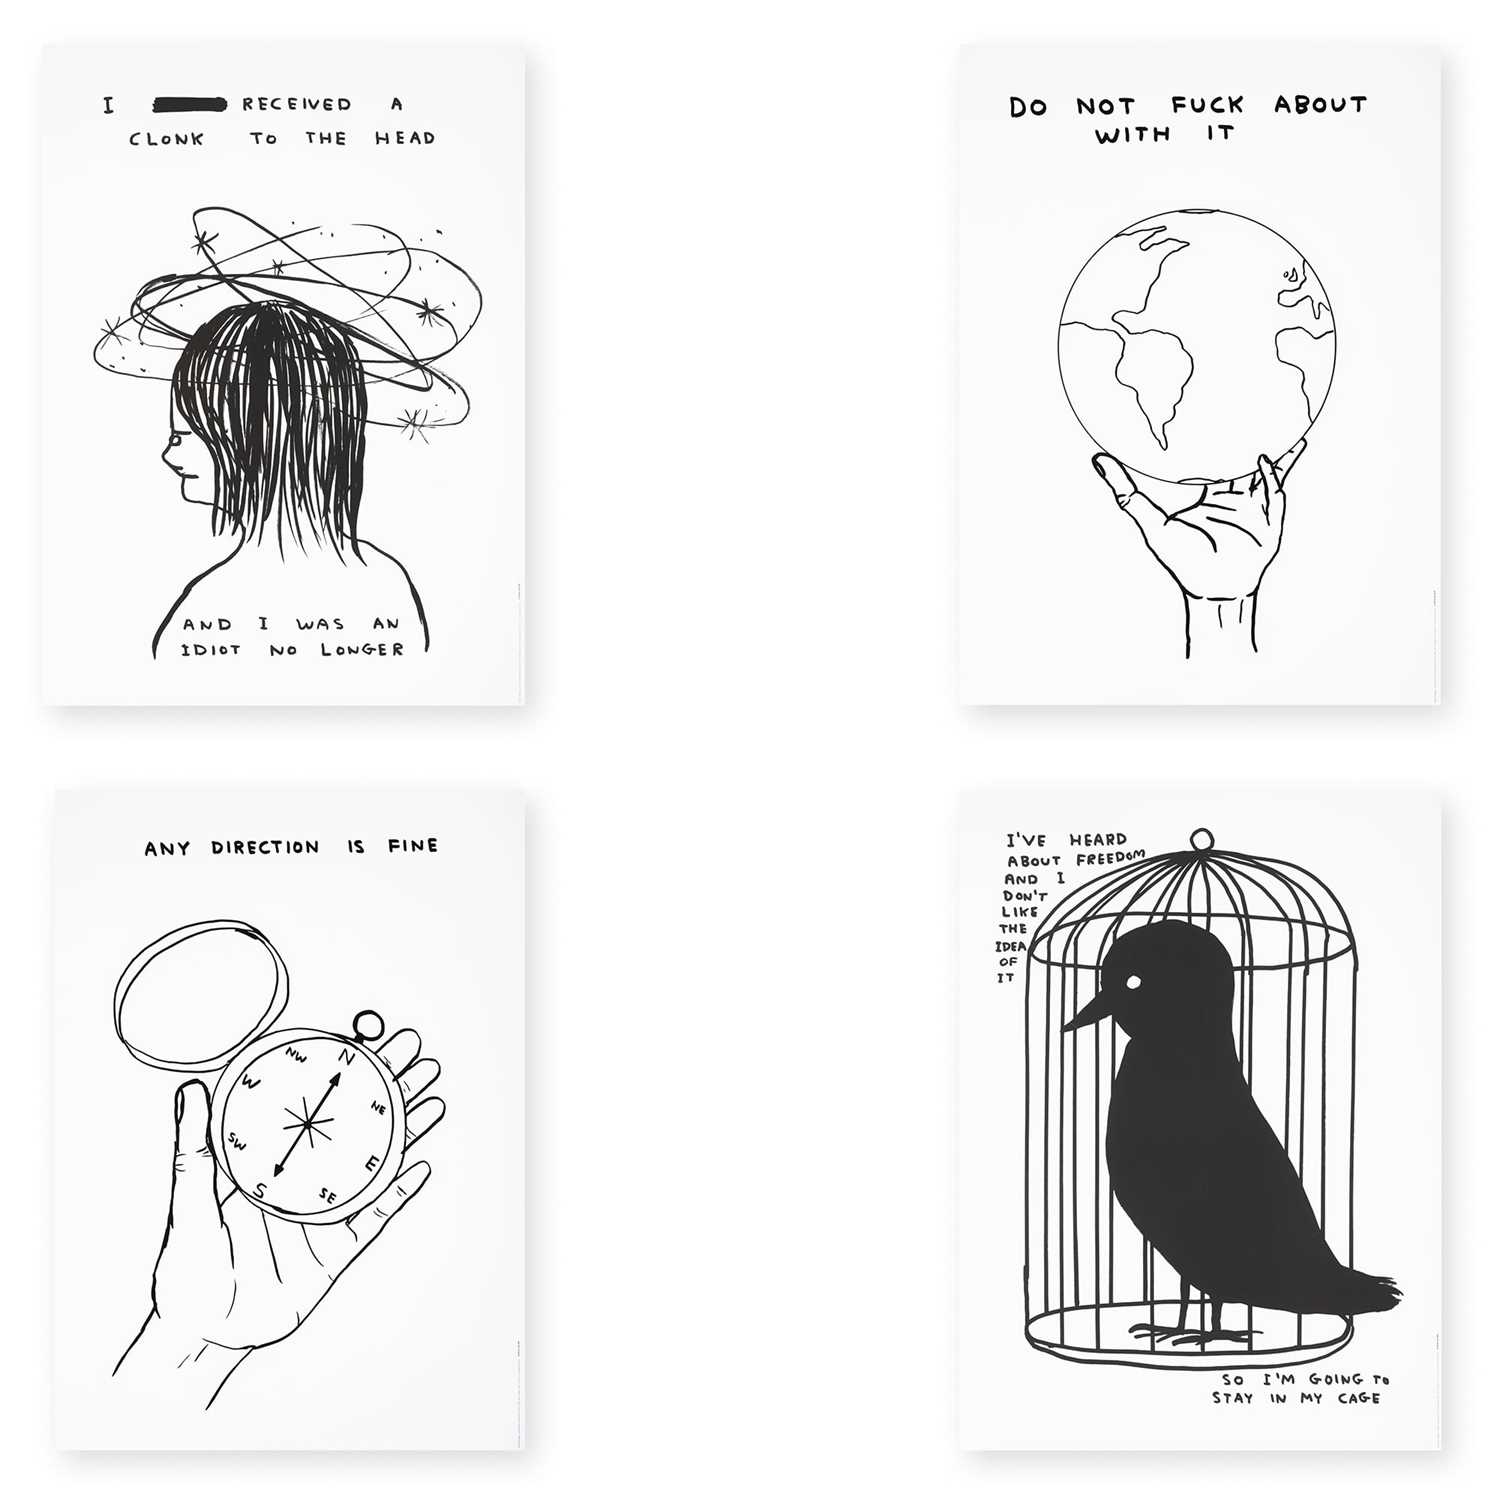 Lot 52 - David Shrigley (British 1968-), 'I Received A Clonk On The Head, Do Not Fuck About With It, Any Direction Is Fine & I've Heard About Freedom', 2022